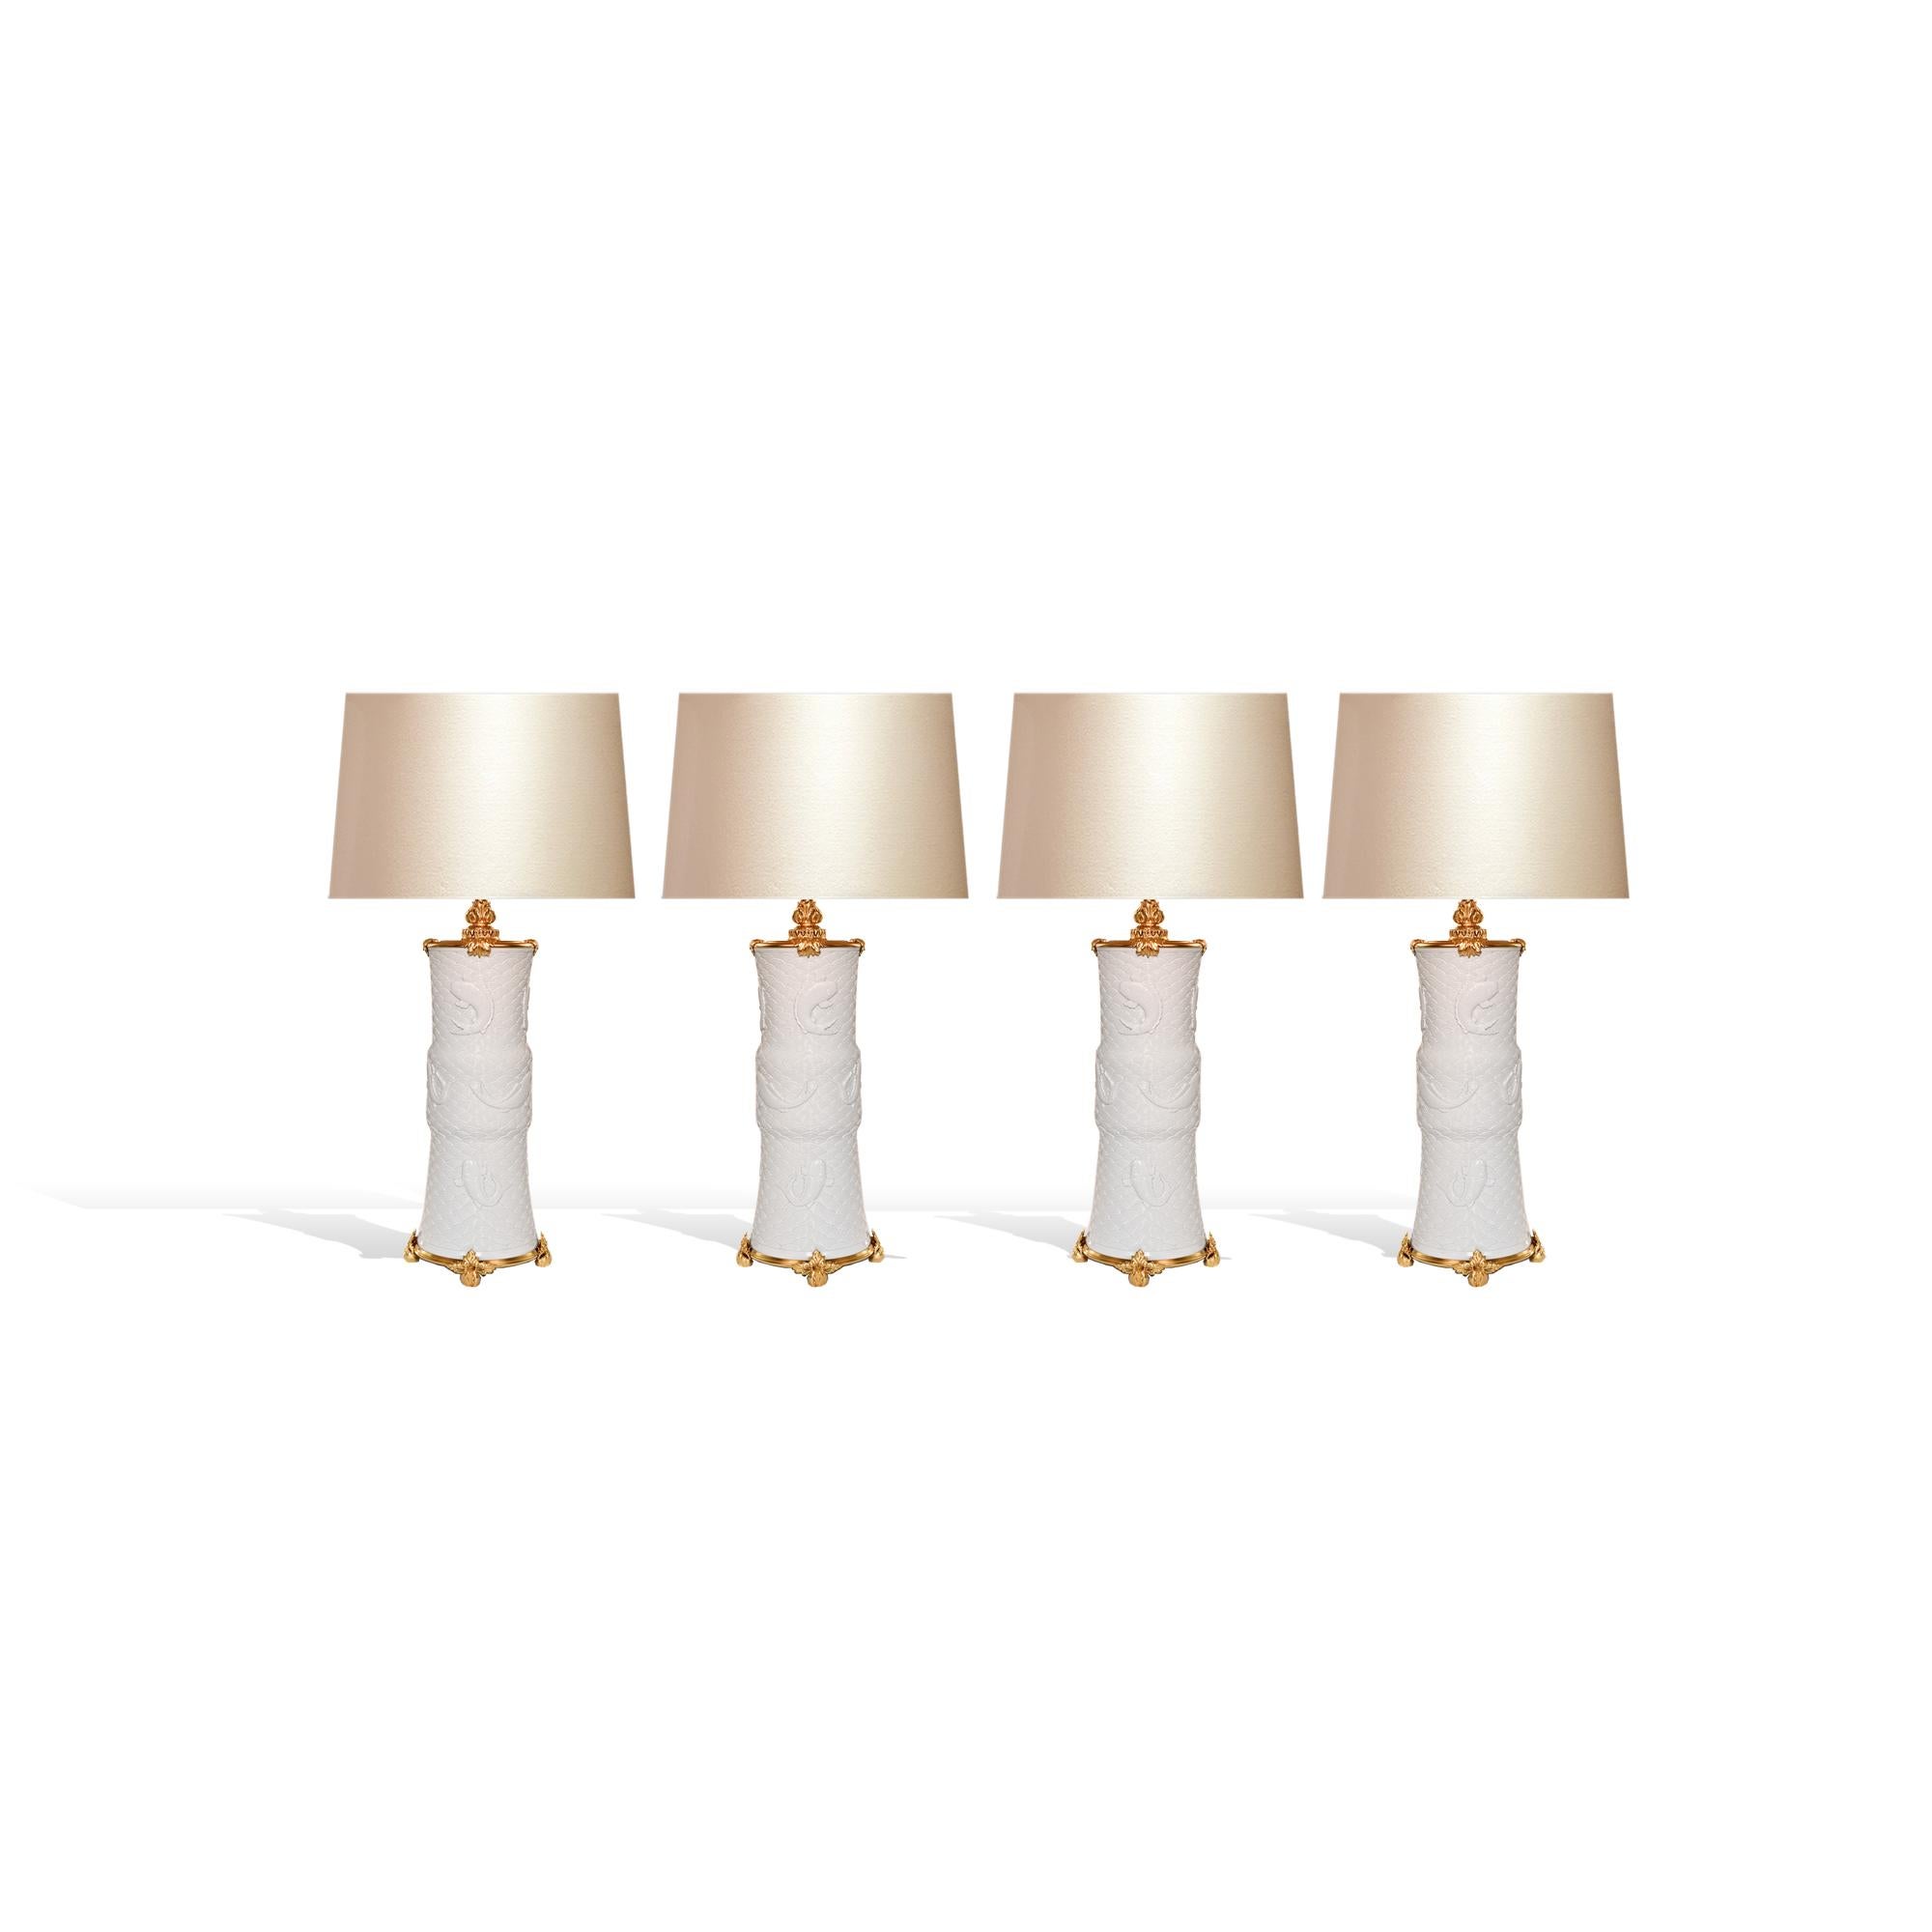 Group of Four Ormolu-Mounted Porcelain Lamps In Excellent Condition For Sale In New York, NY